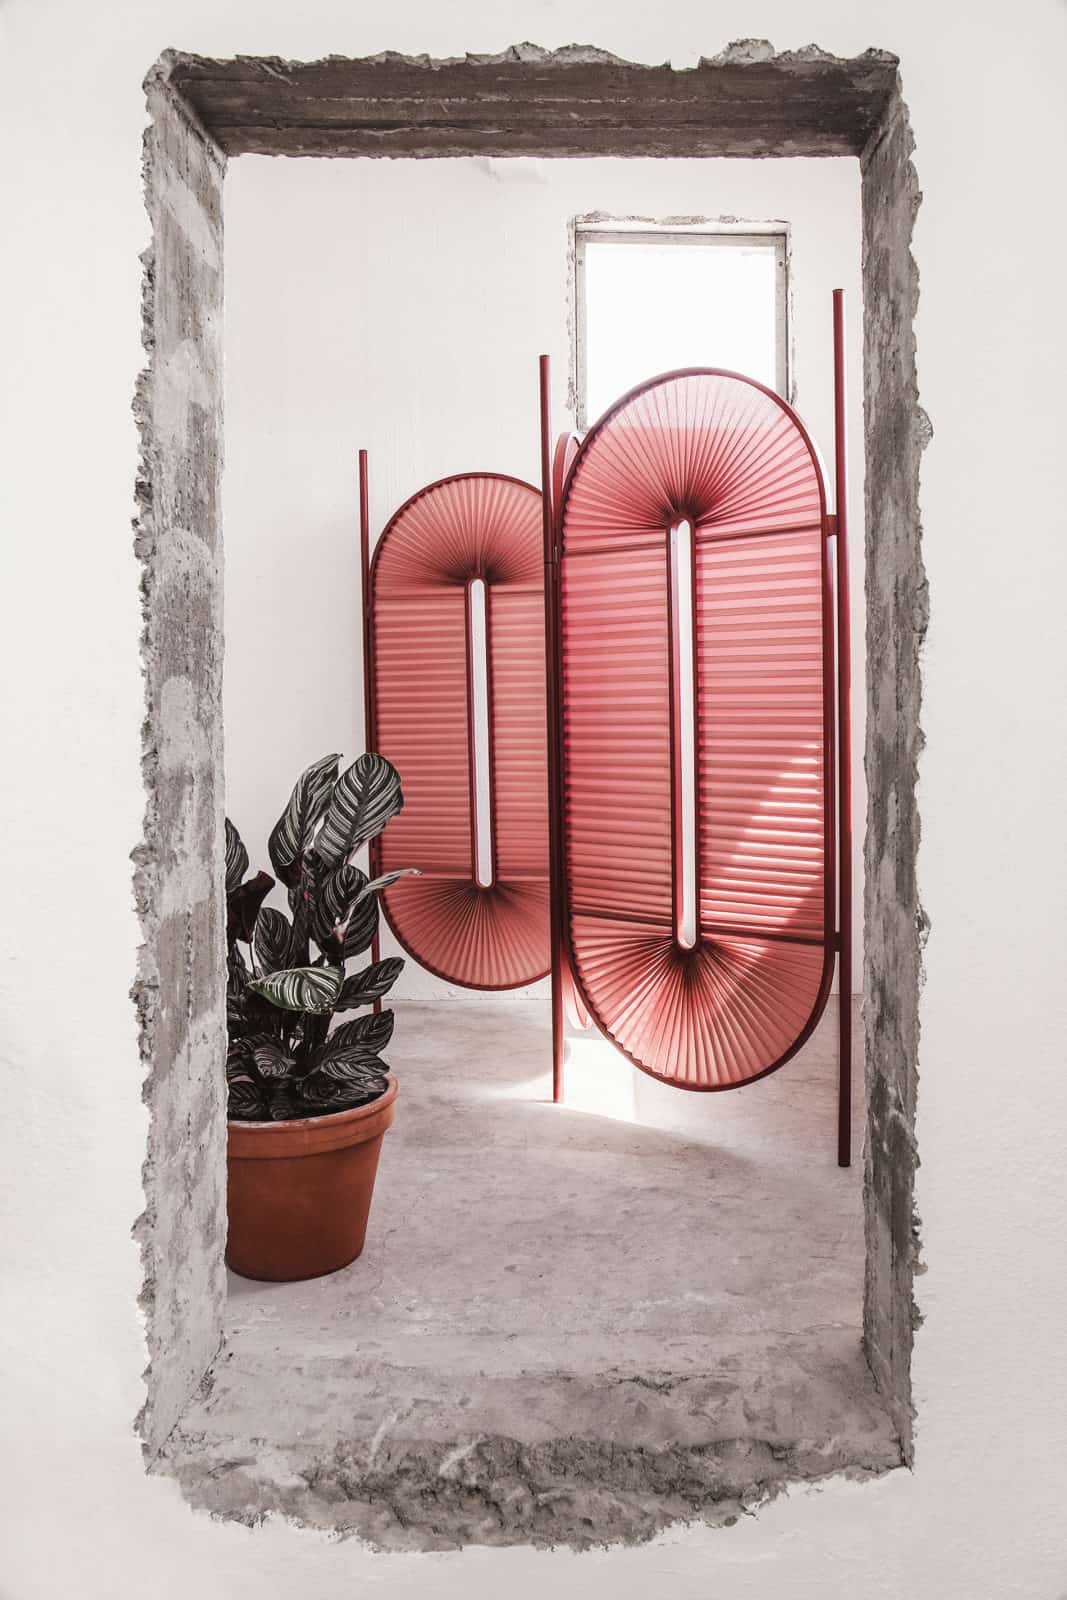 shim pink interior trend 2018 news from imm cologne